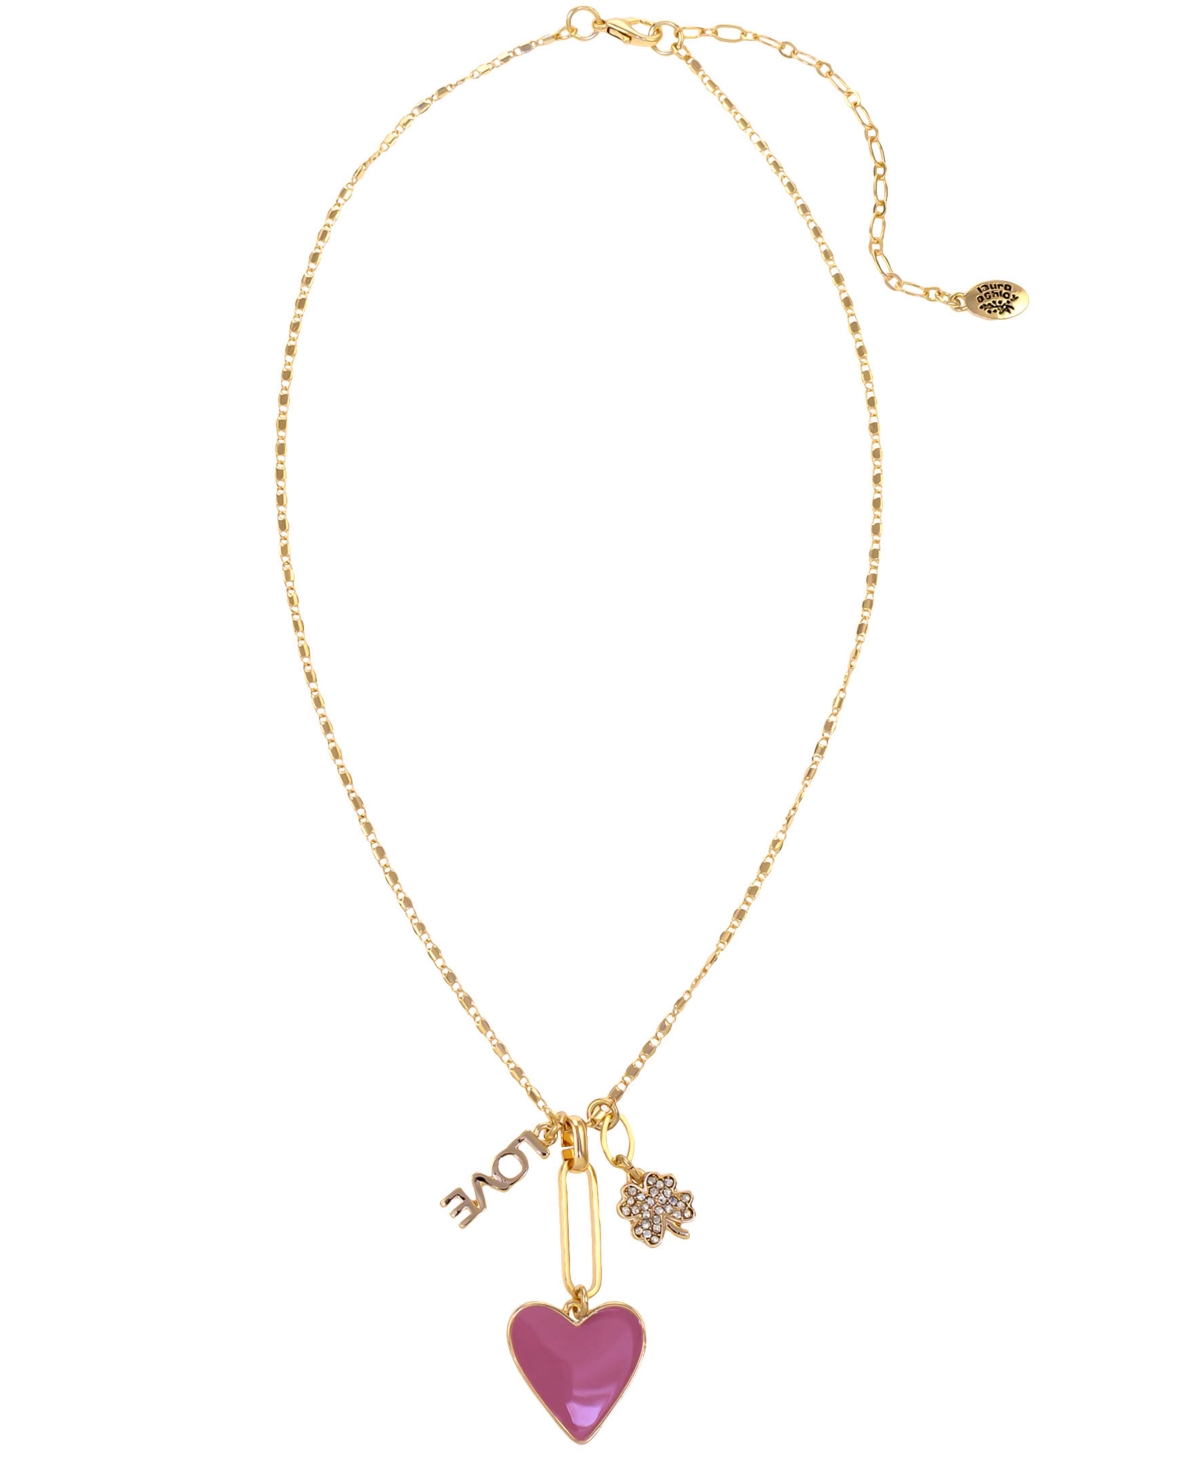 Love Charm Necklace - Pink